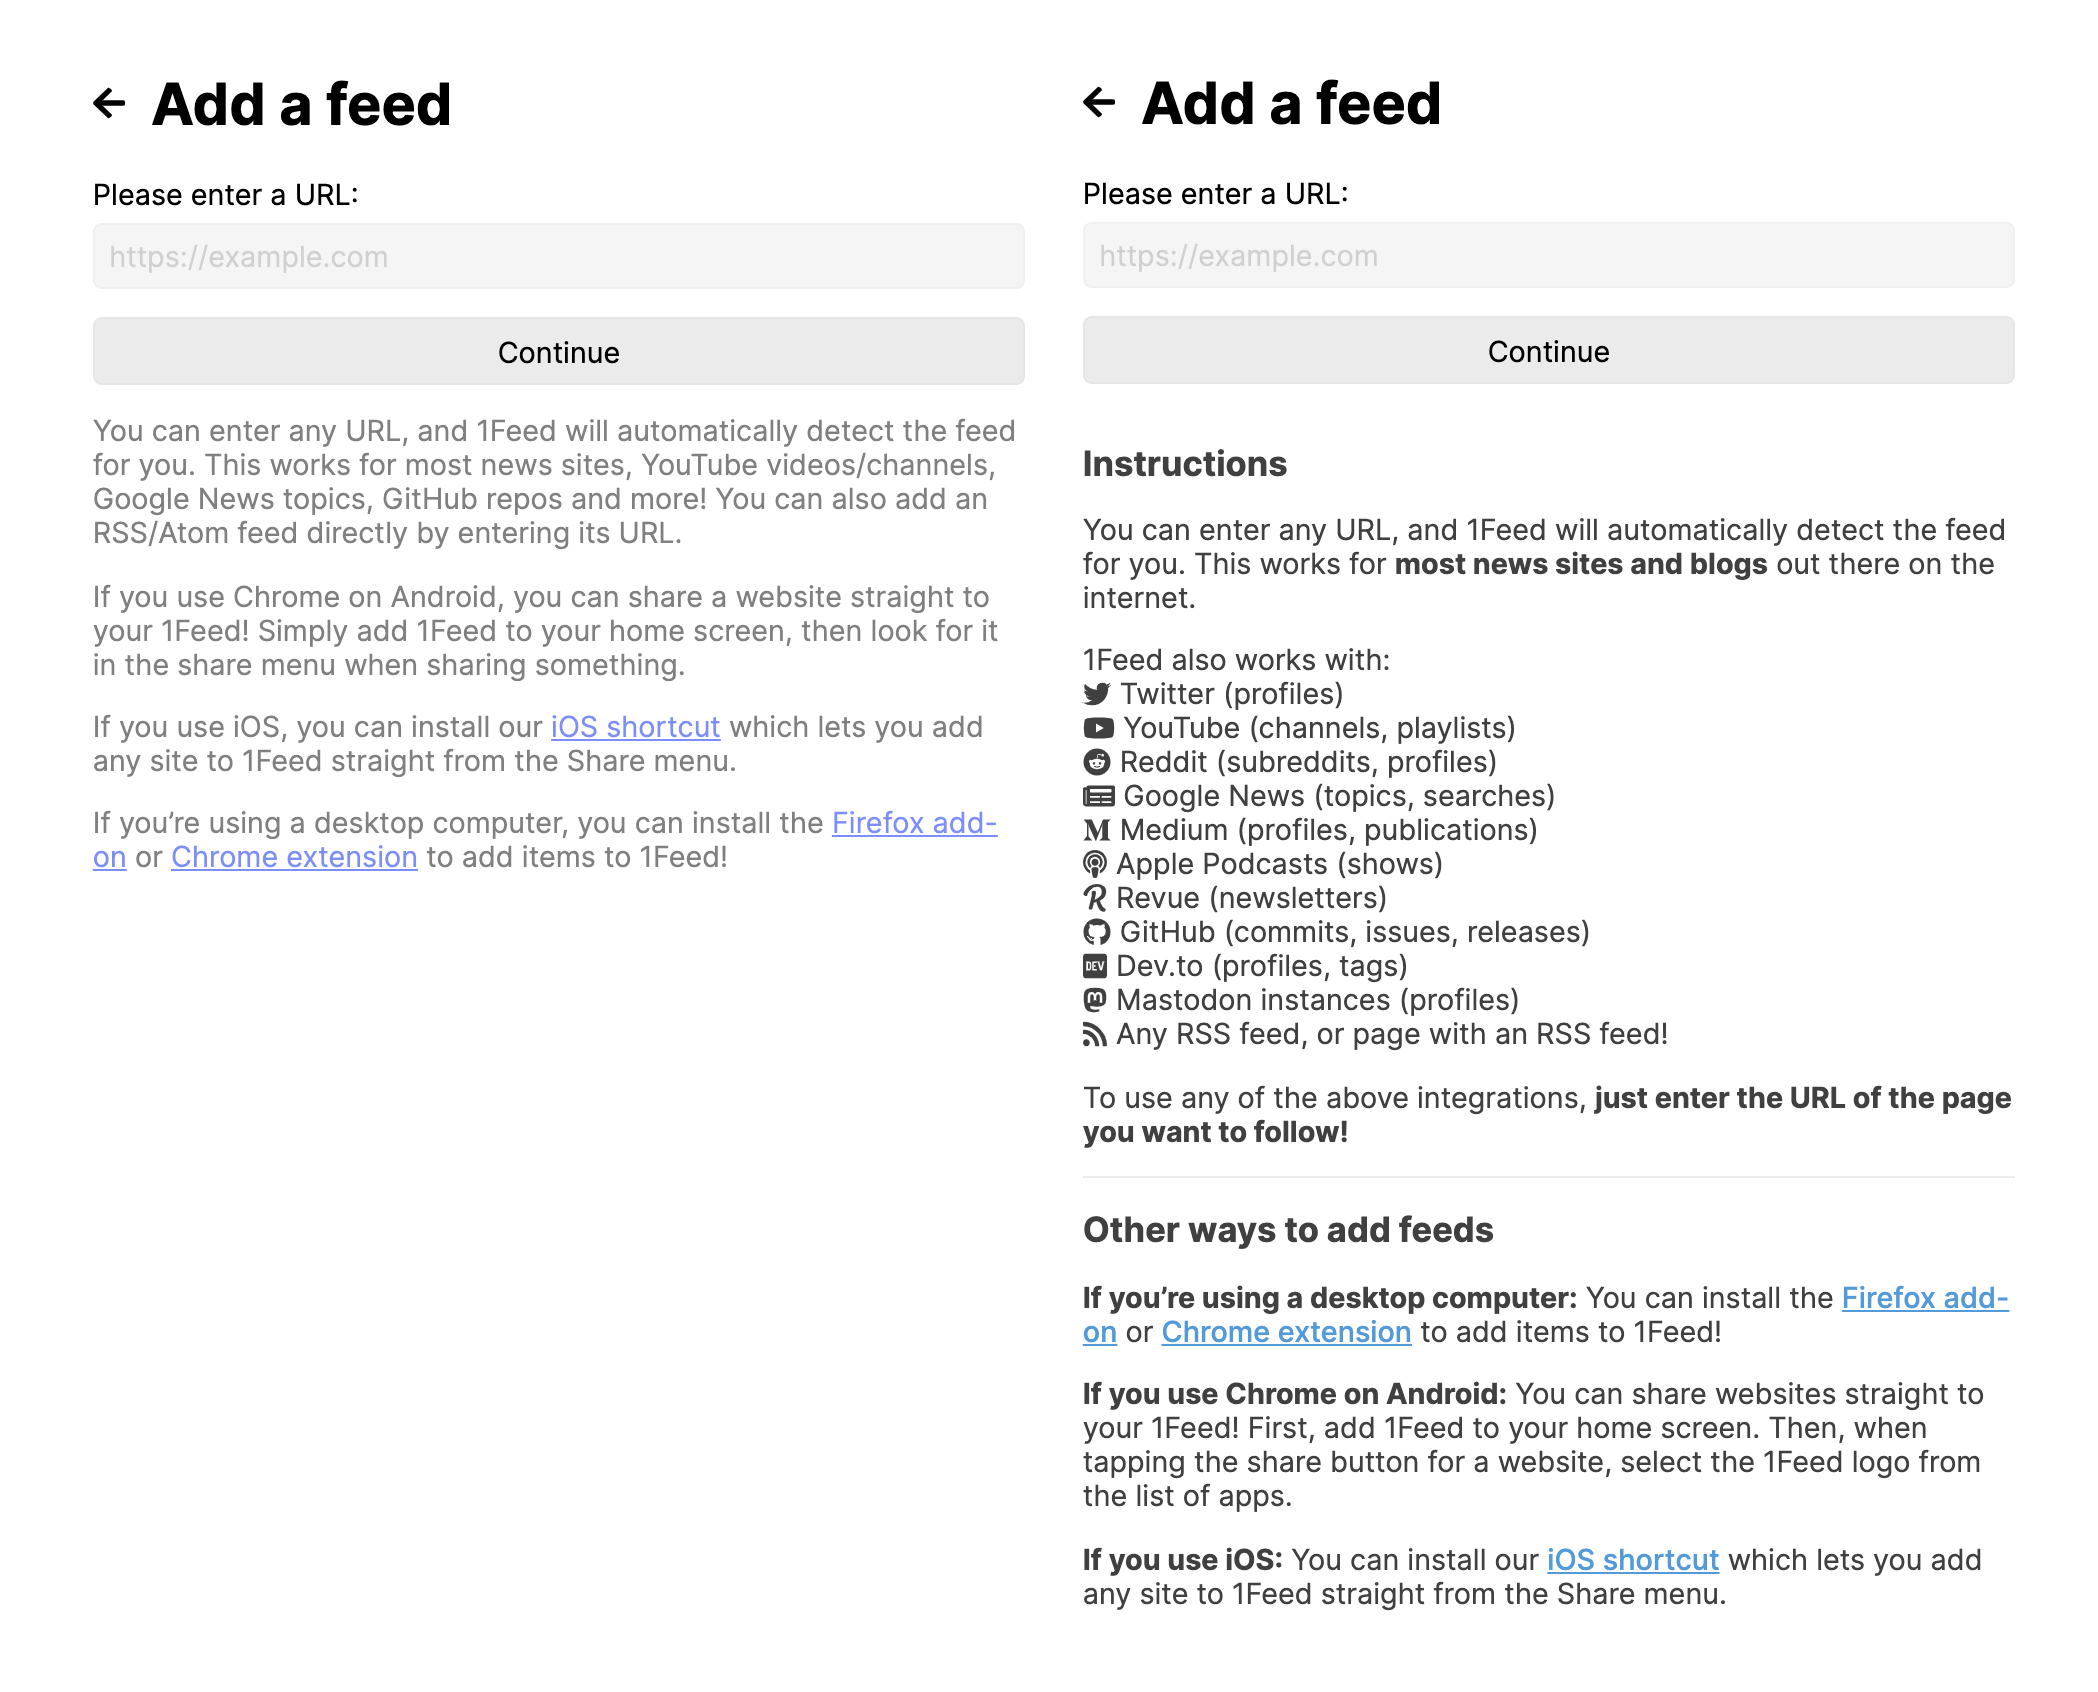 A screenshot of the old and new feed adding instructions